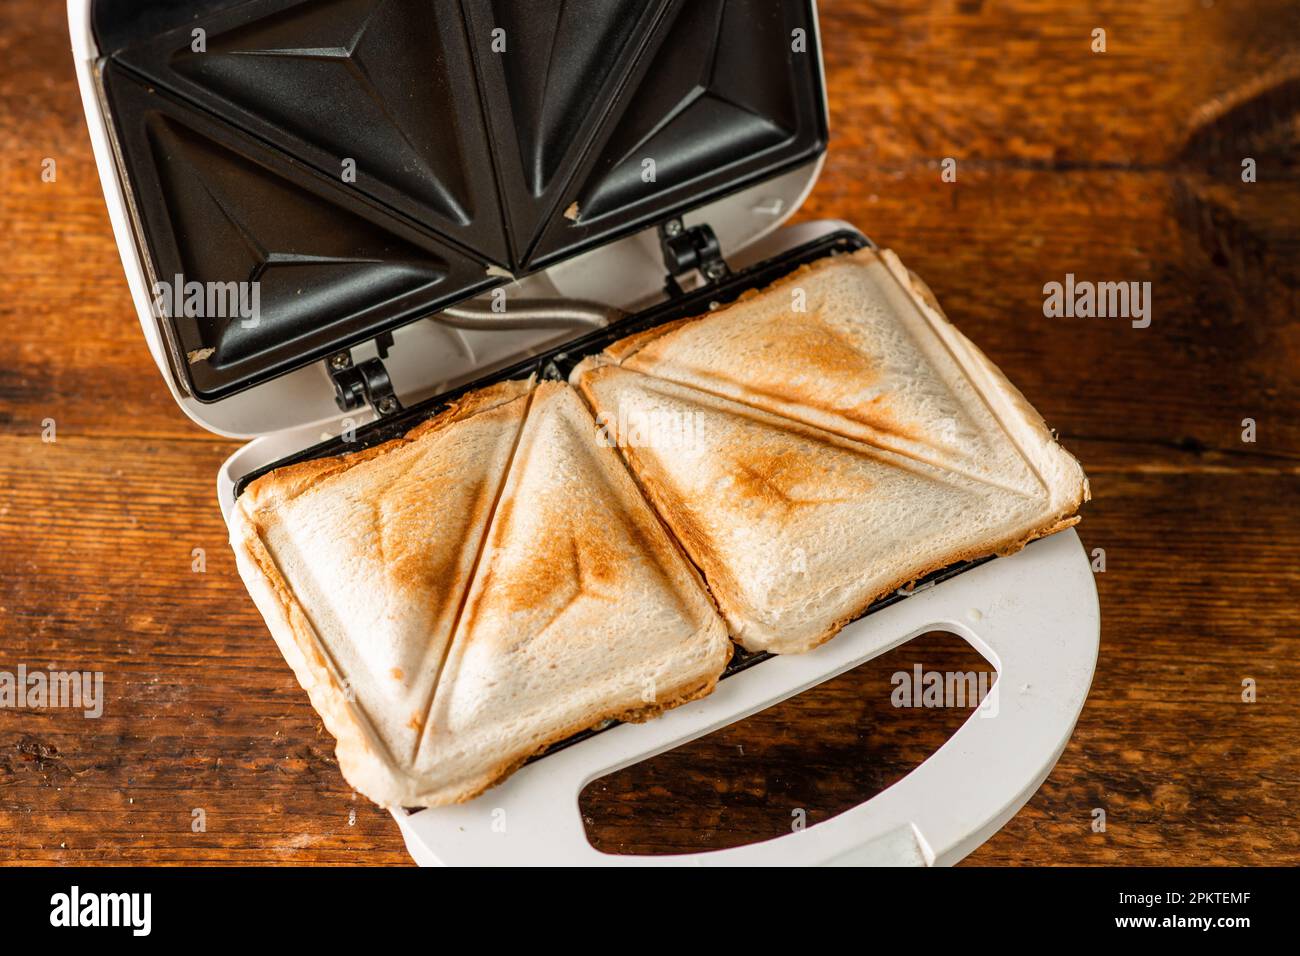 https://c8.alamy.com/comp/2PKTEMF/freshly-made-toasted-sandwiches-in-a-sandwich-maker-on-a-wooden-background-morning-breakfast-concept-2PKTEMF.jpg